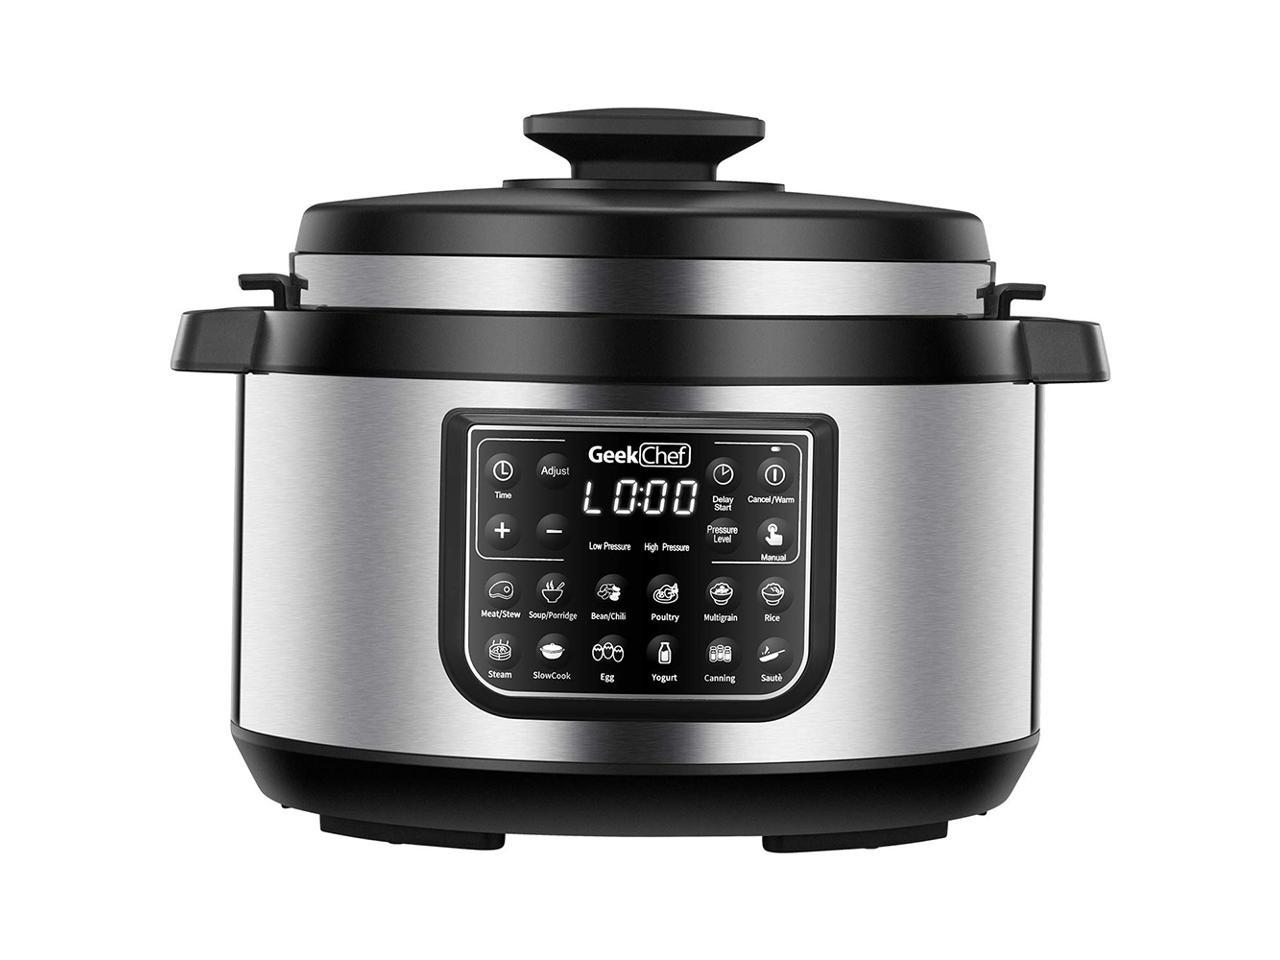 Bronstarz 6 Qt 8-in-1 Electric Pressure Cookers Pressure Canner and Cooker with Instant Stainless Steel Pot